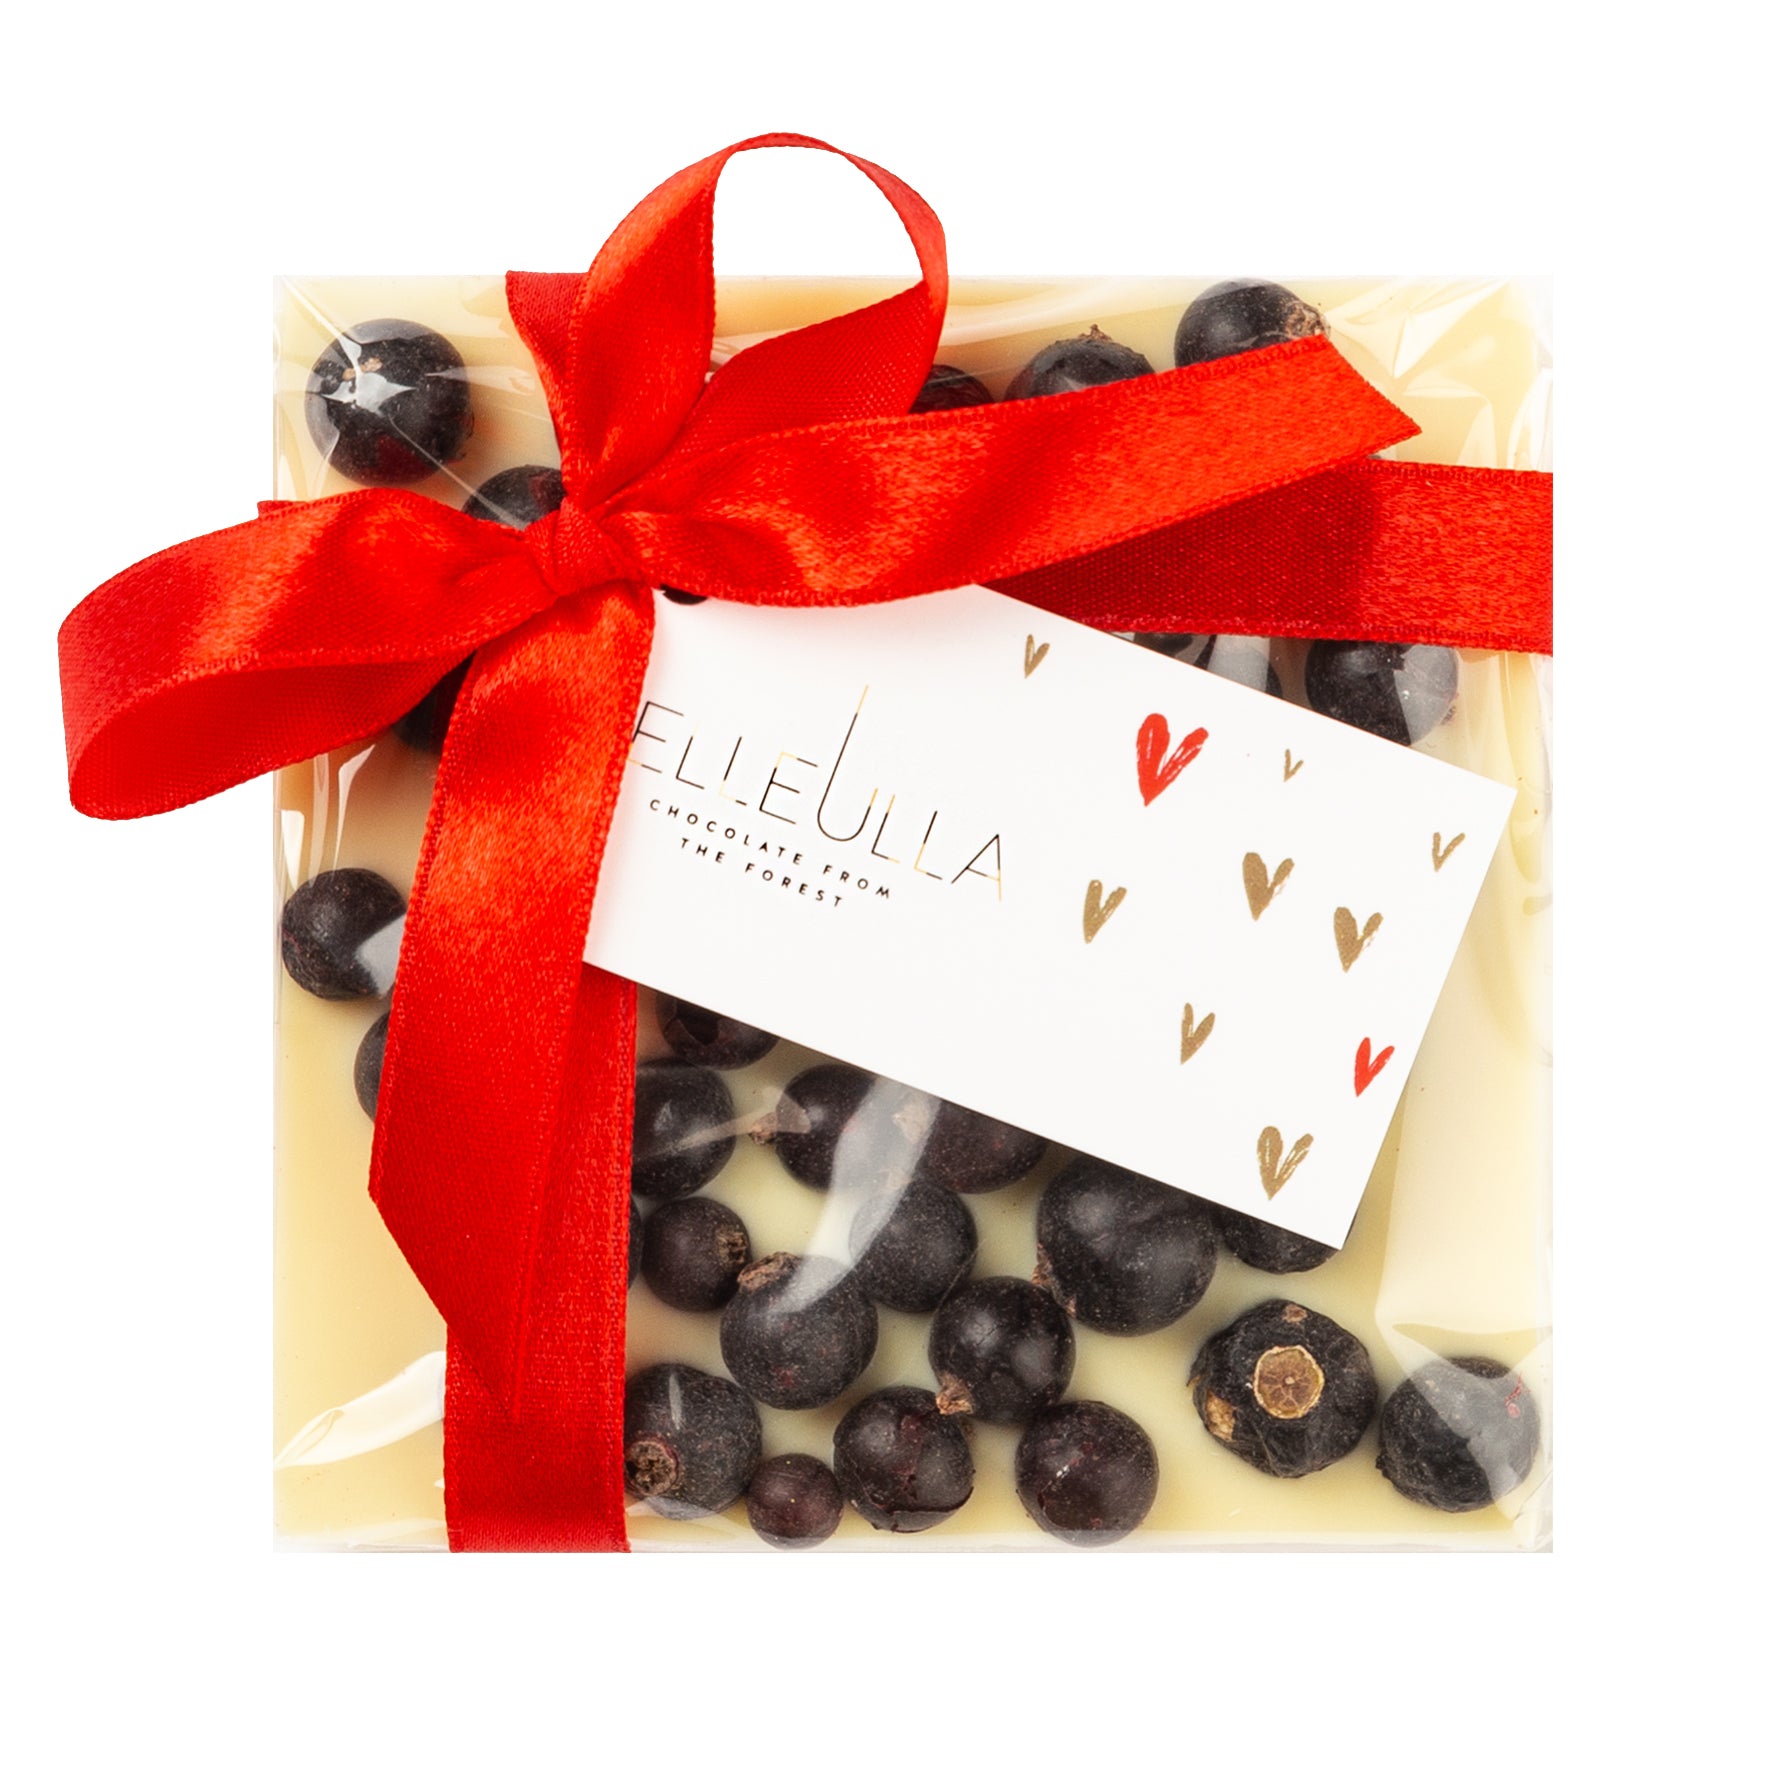 BERRY LOVE / WHITE CHOCOLATE / BLACK CURRANT - with winter card - small